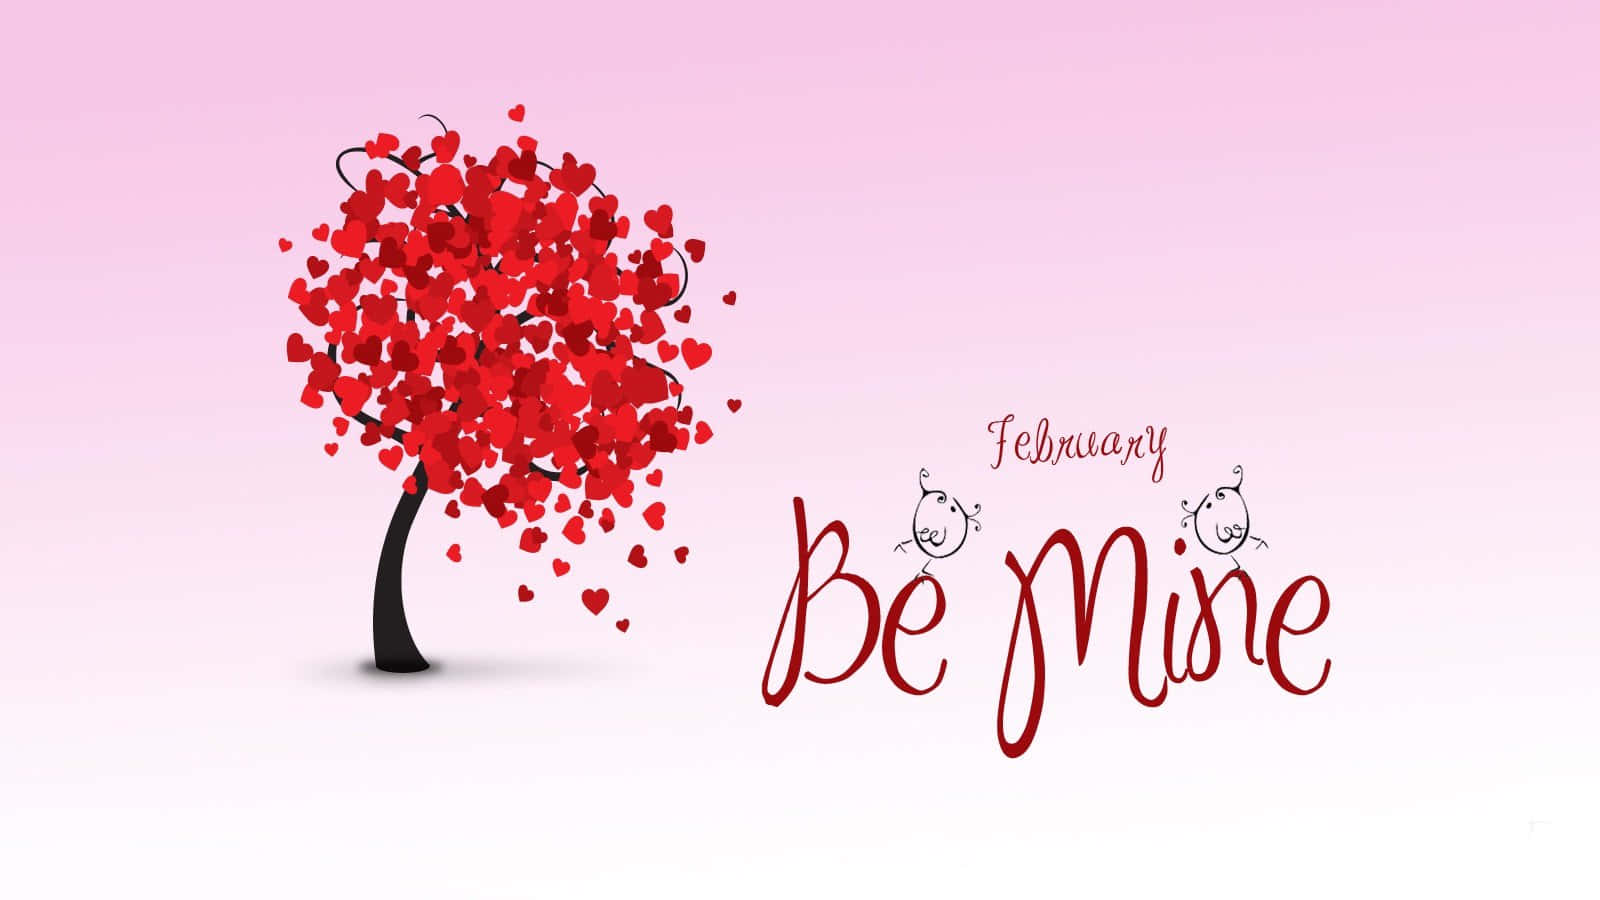 Valentine's Day: A romantic day for love and cherishing moments